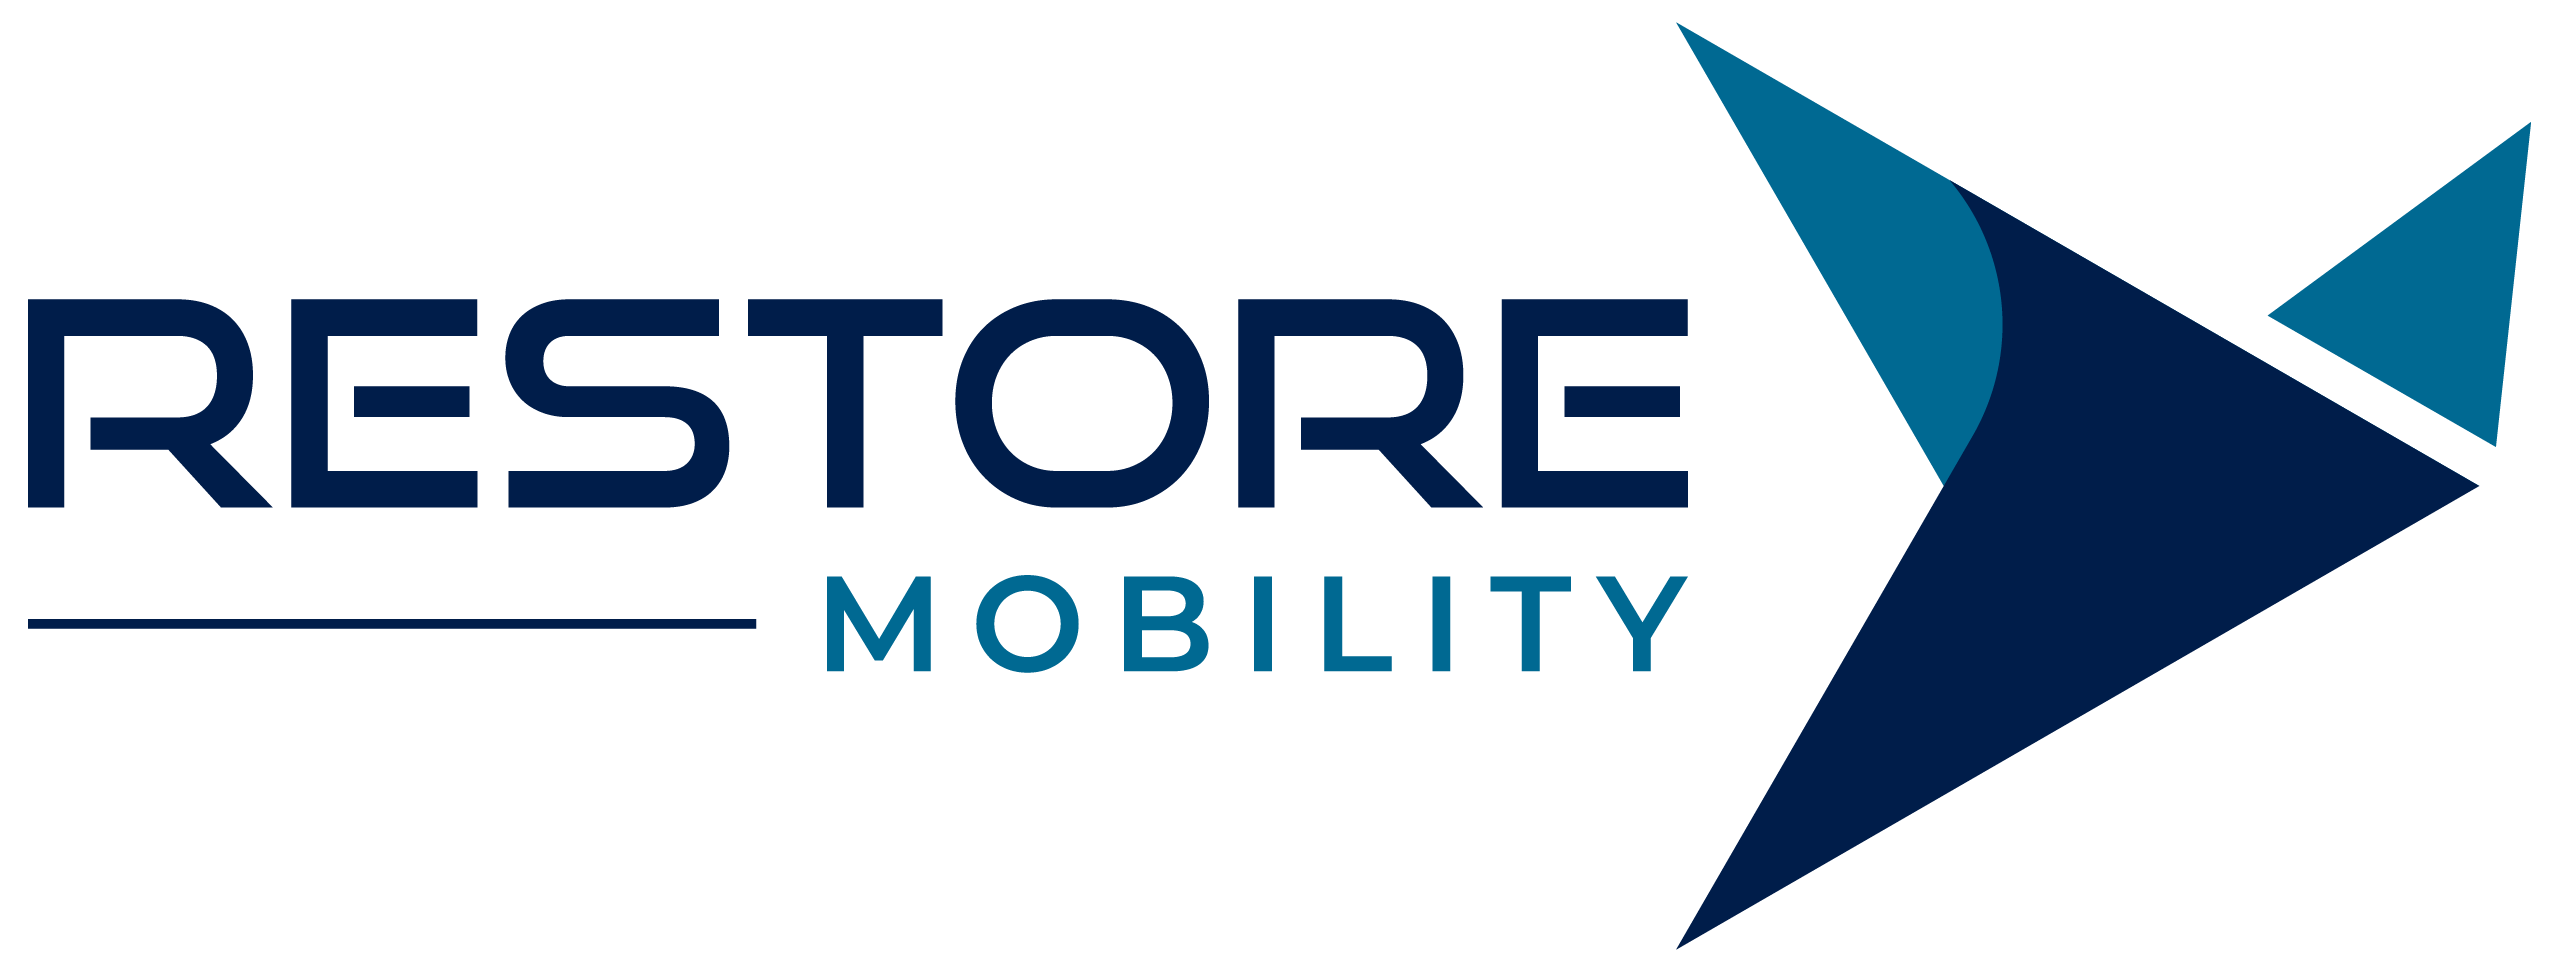 Restore Mobility Logo.png